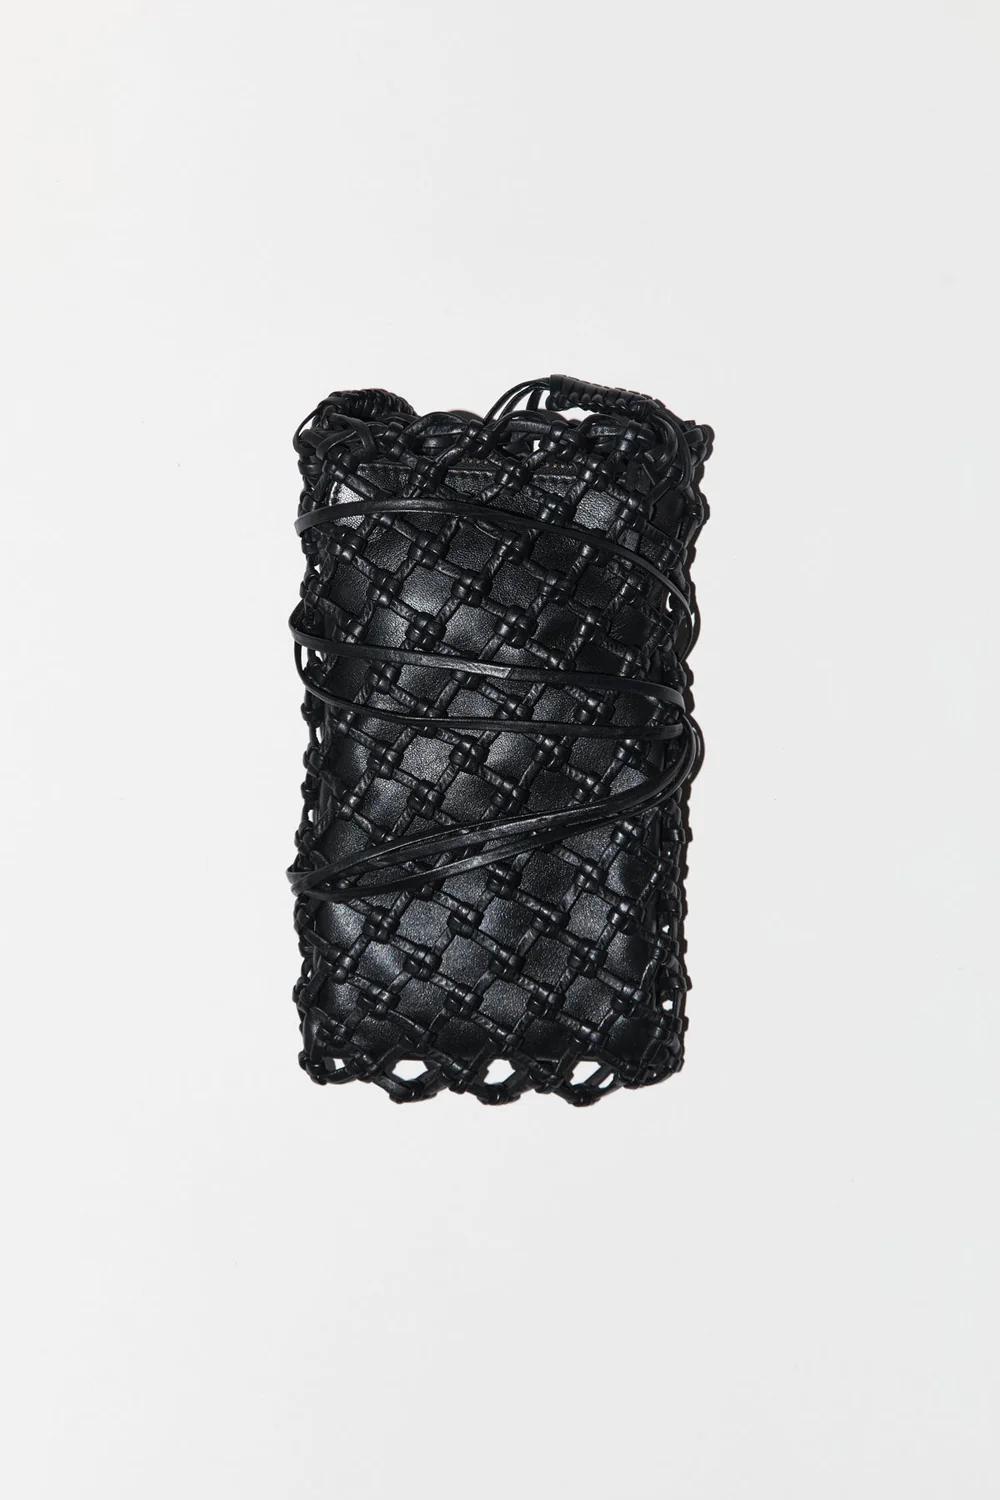 Product Image for Macrame Sling Pouch, Black